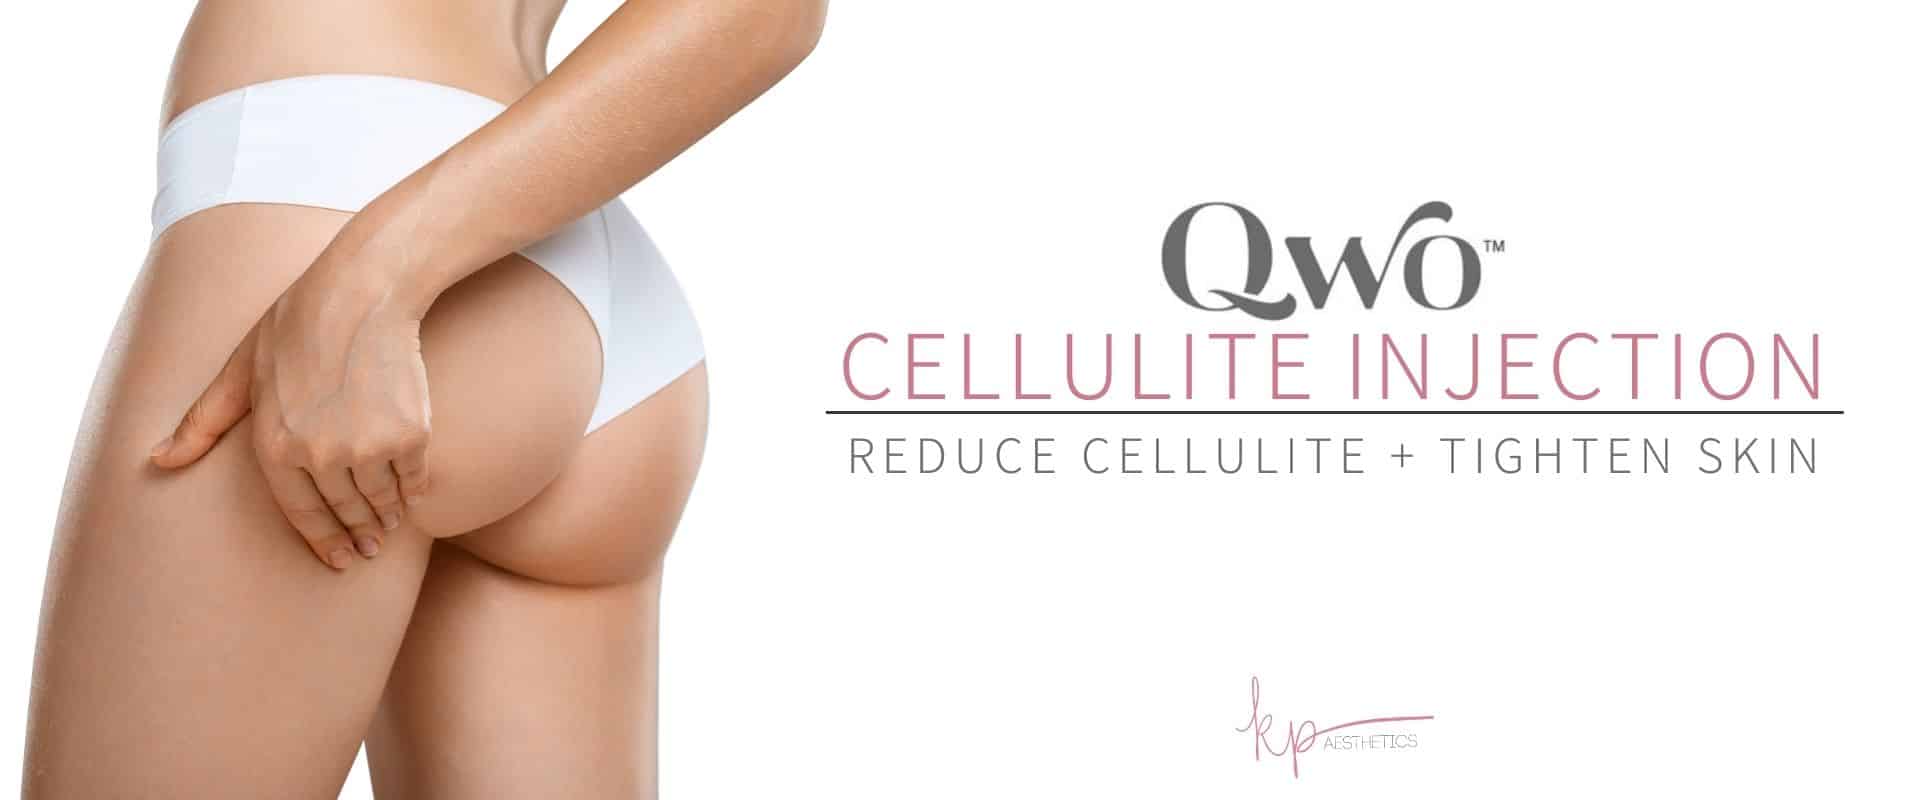 Perfect female buttocks without cellulite after qwo injectable treatment